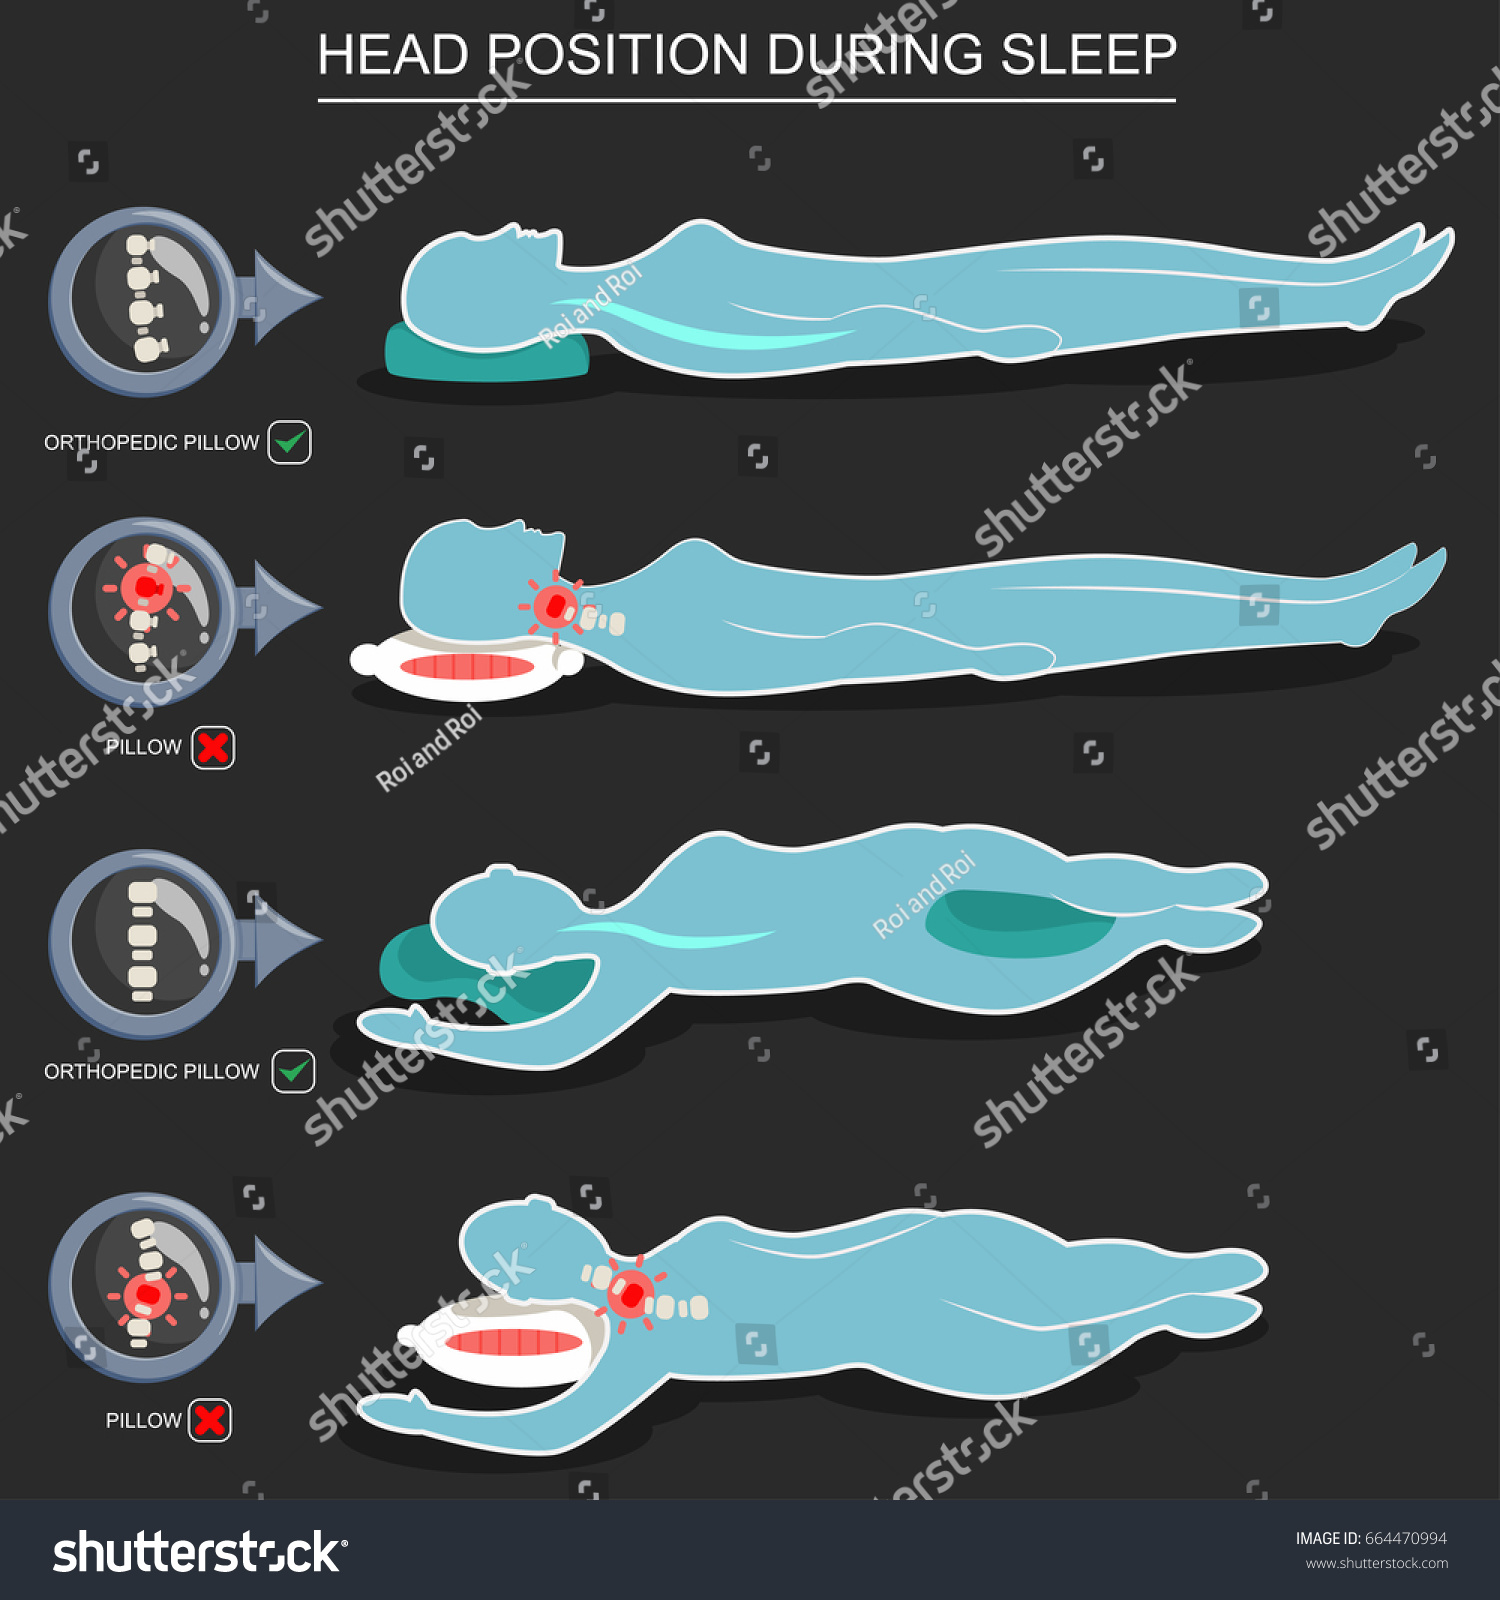 SVG of Orthopedic pillows for correct position of head during sleep. Vector illustration of the right and wrong posture of people lying on the back and side. Medical infographic for a healthy spine and neck. svg